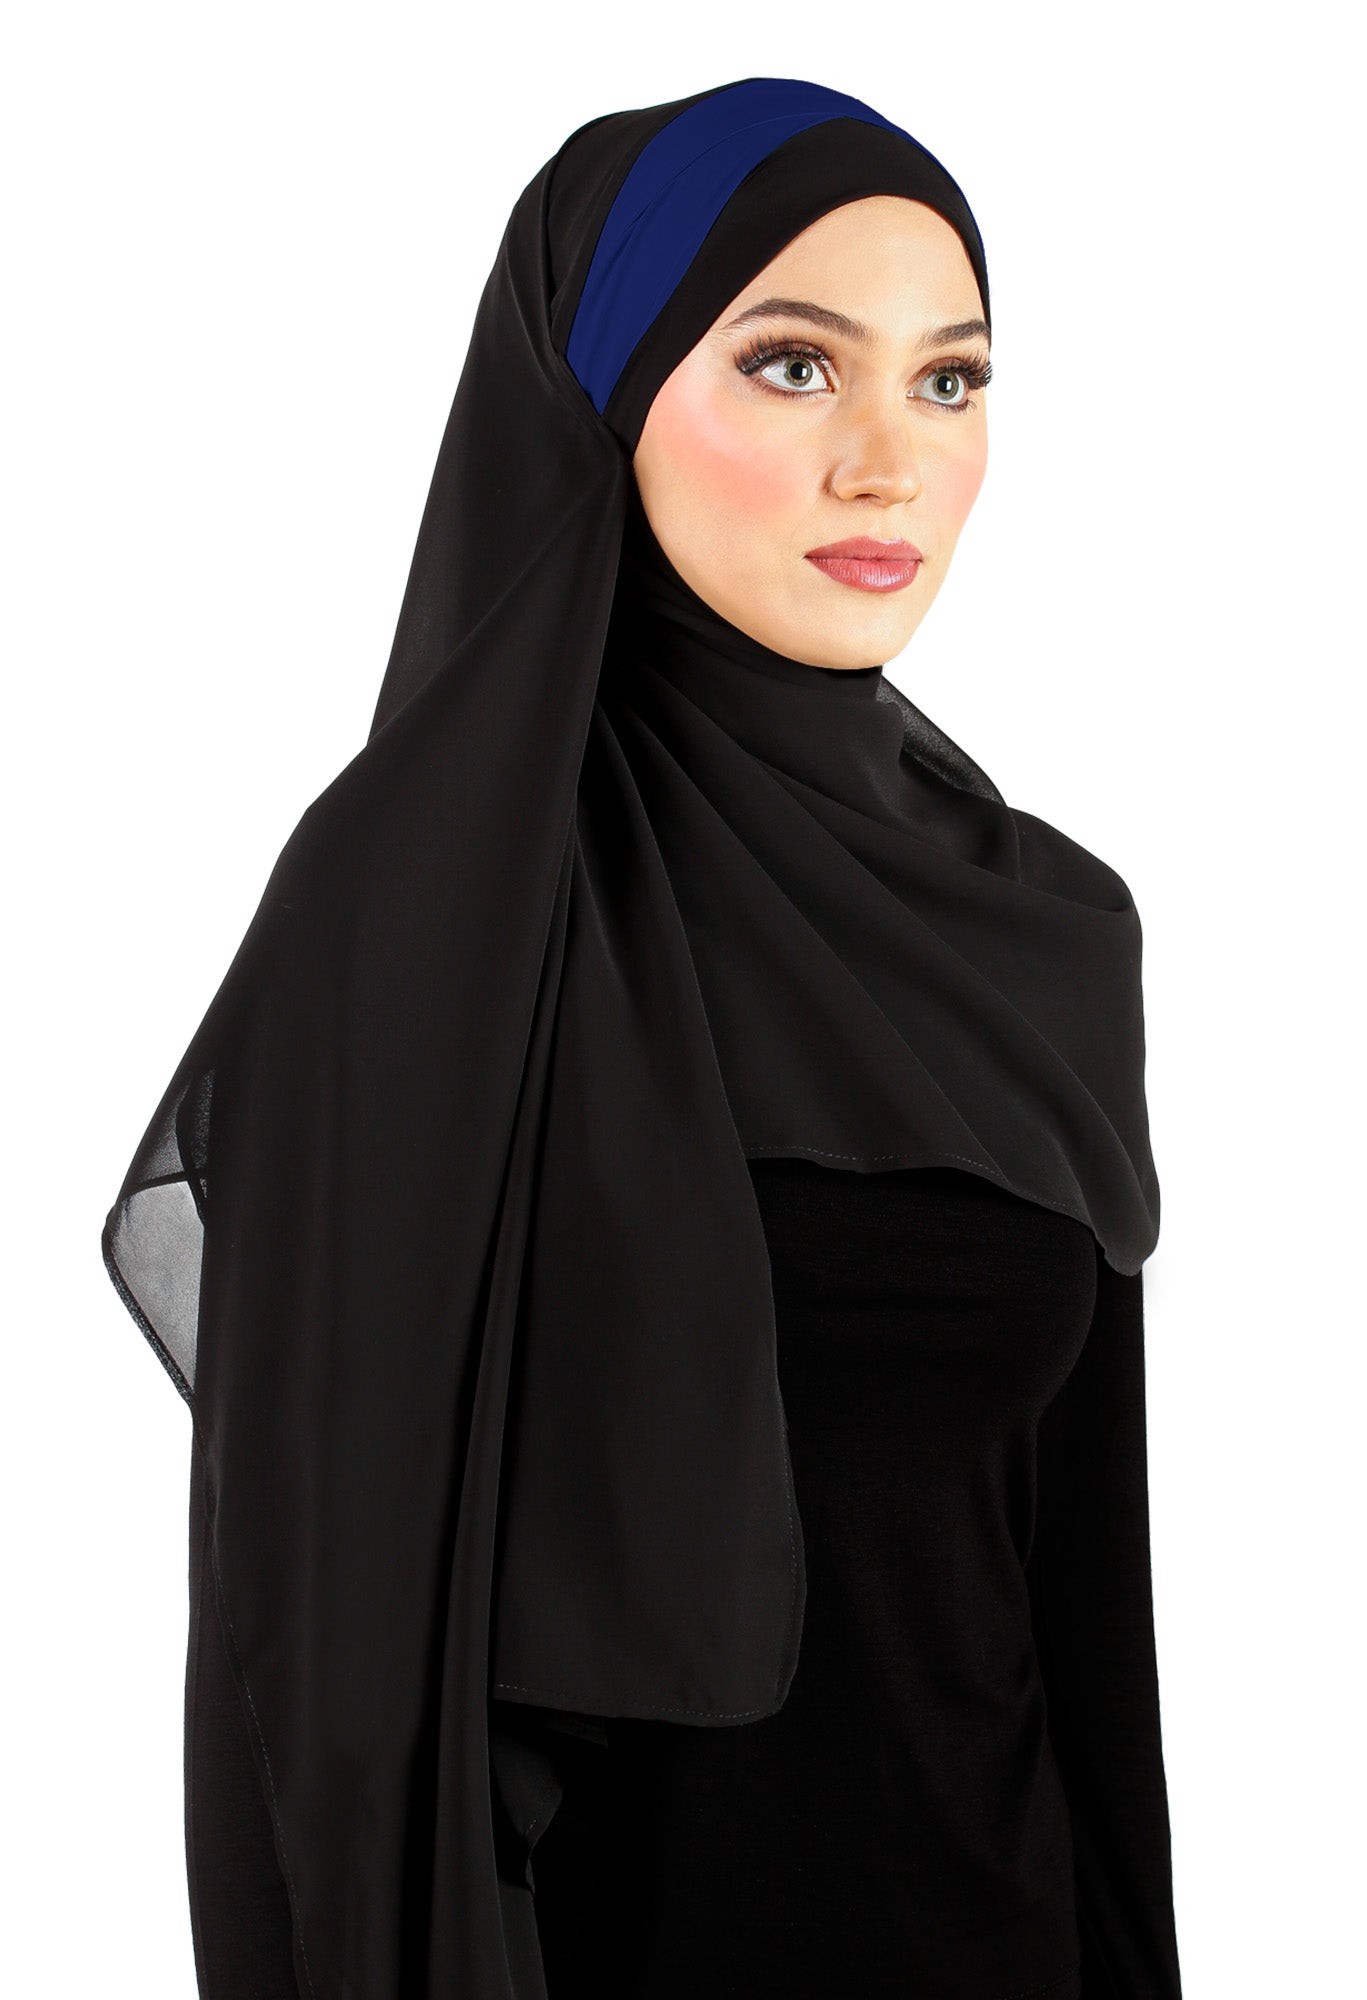 Chiffon Wrap Hijab with caplet and sashes that tie back to secure hijab black with blue accent on the caplet